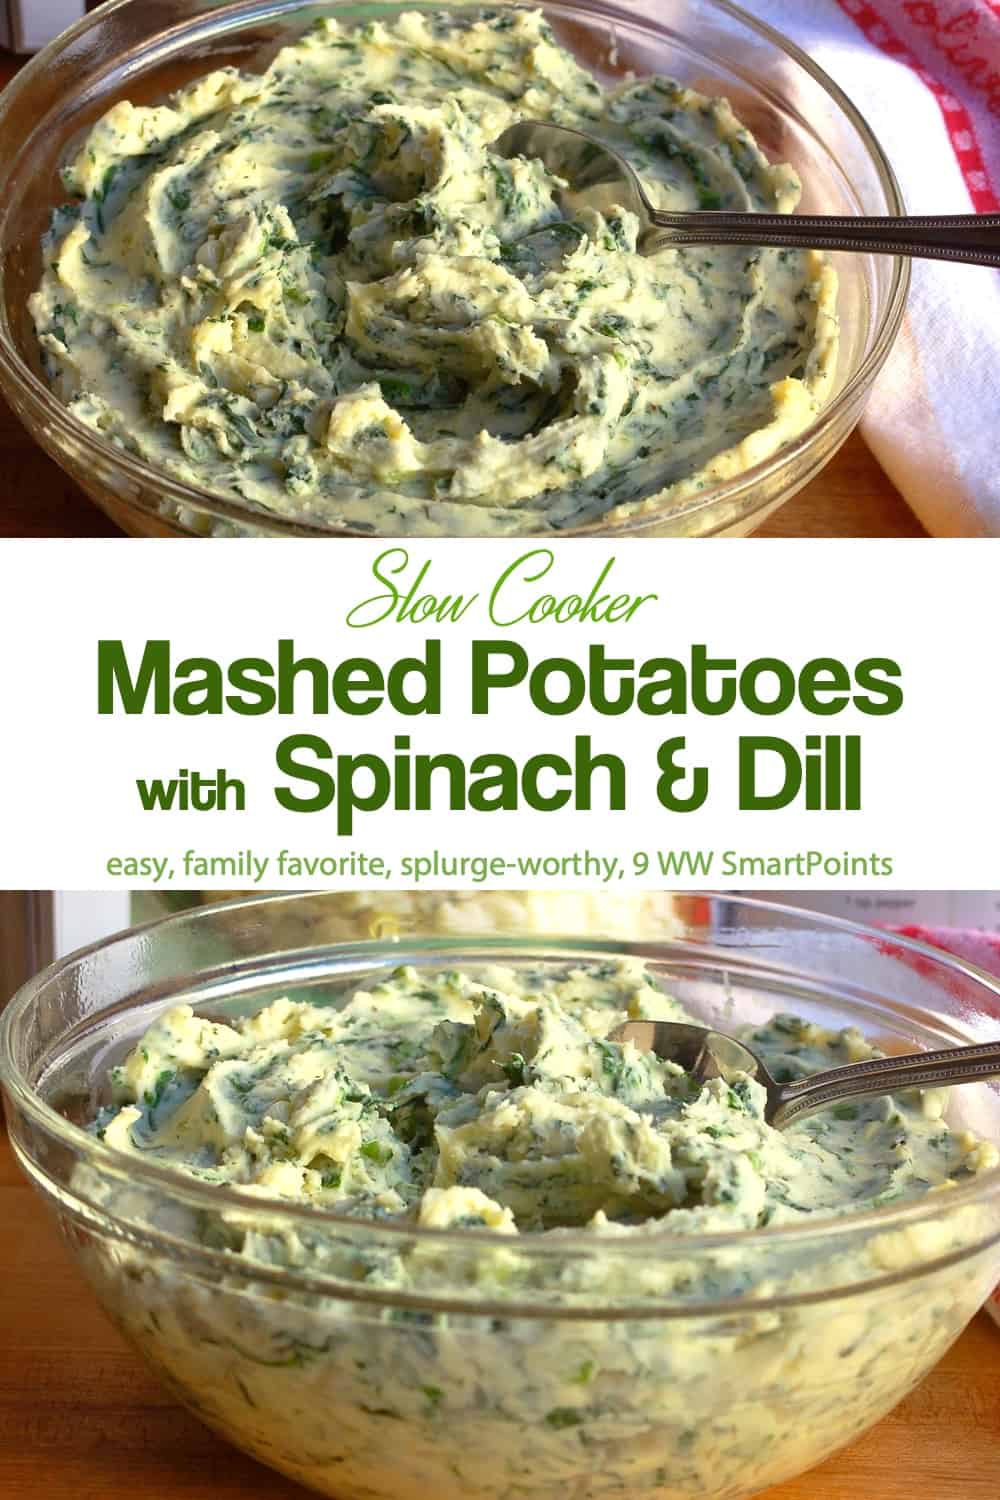 Side view and top view of glass bowl with spinach and dill mashed potatoes